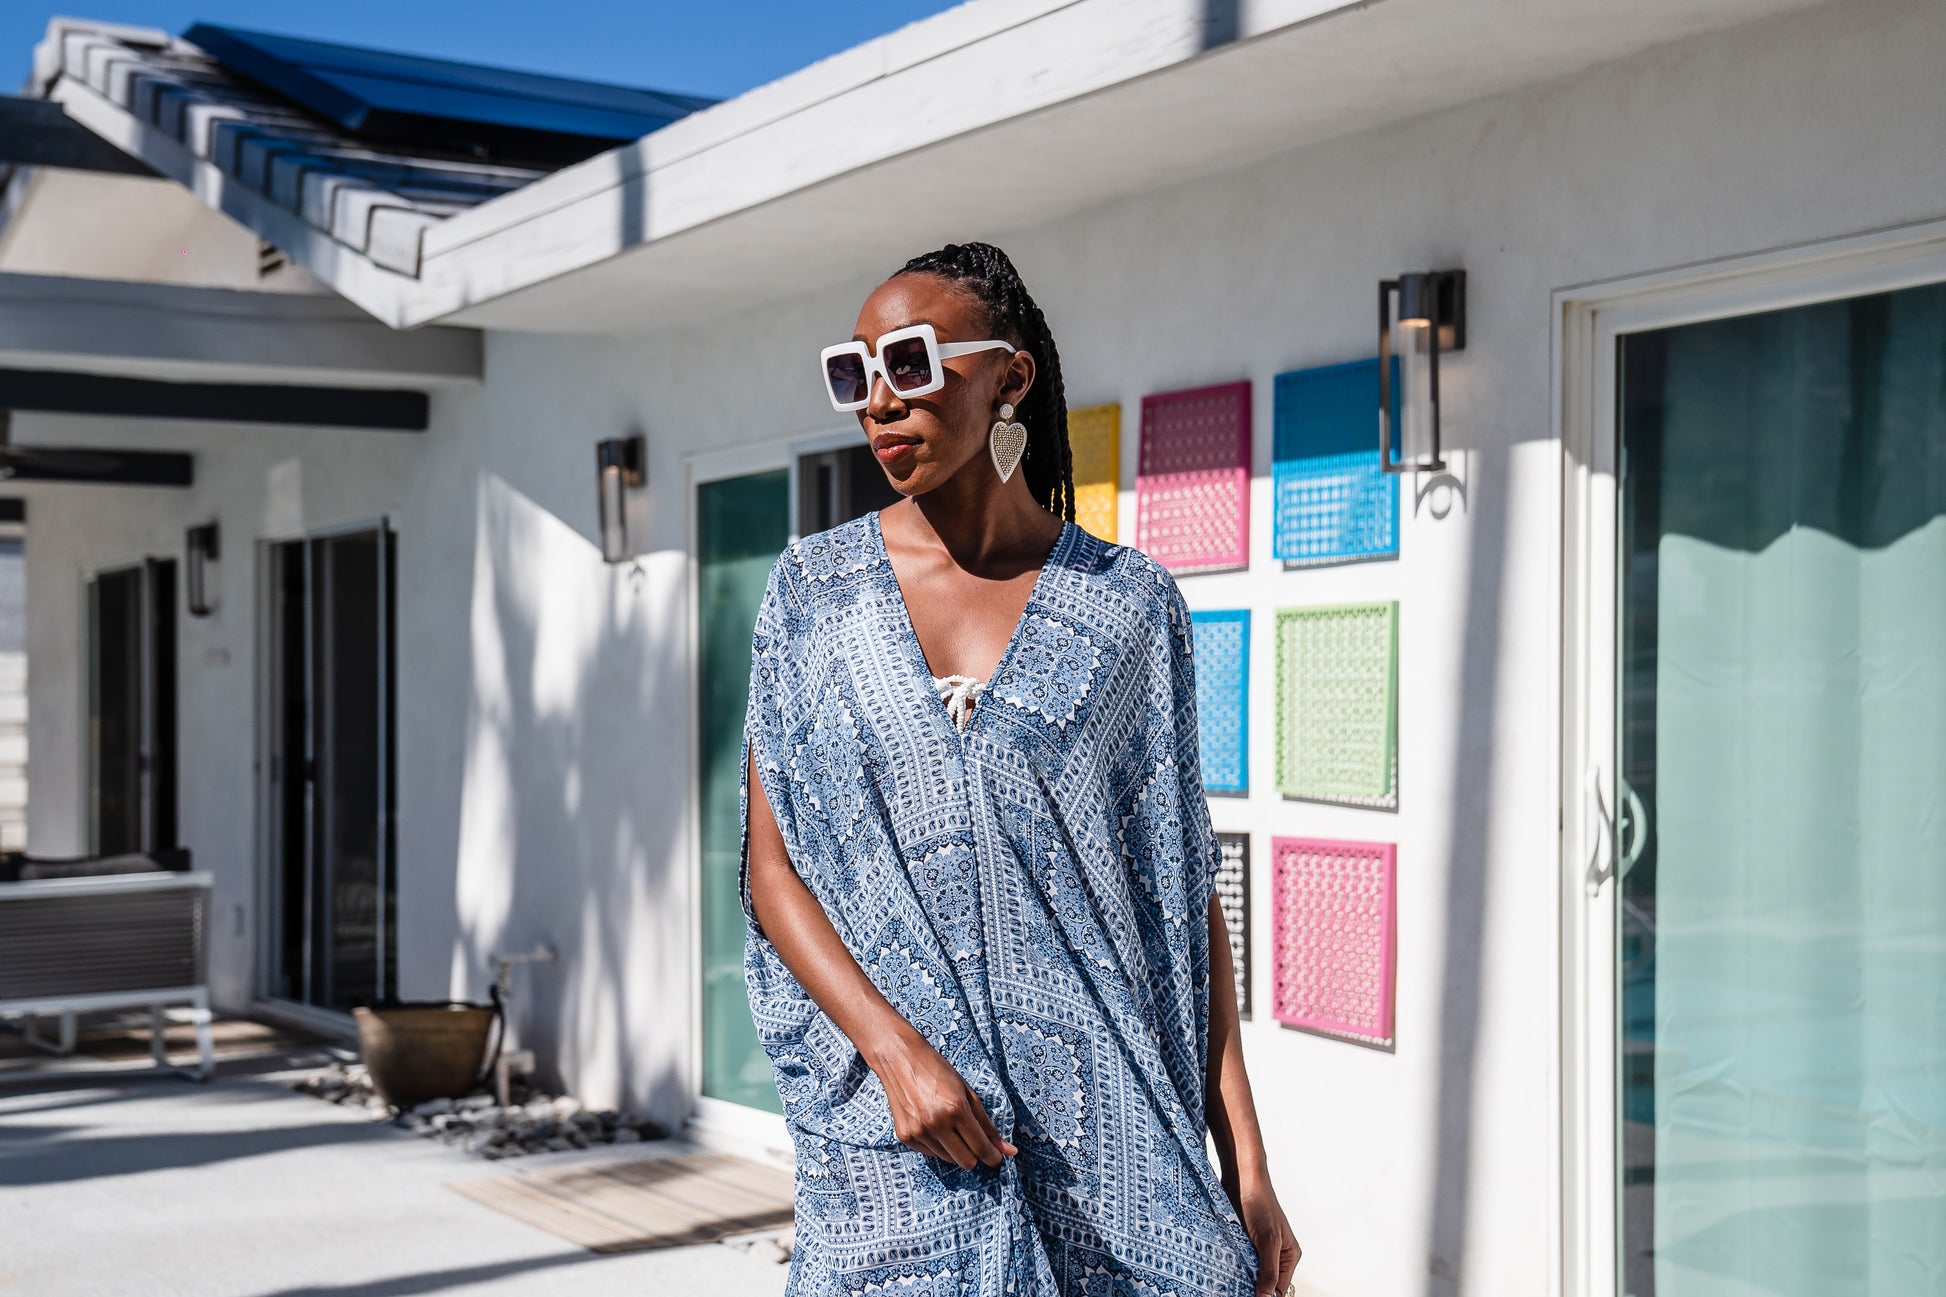 Blue patchwork caftan featuring v-neck, batwing sleeves, and ankle length hem. Airy and flowy, this bohemian inspired caftan dress is great for loungewear, layering, and beachwear. 